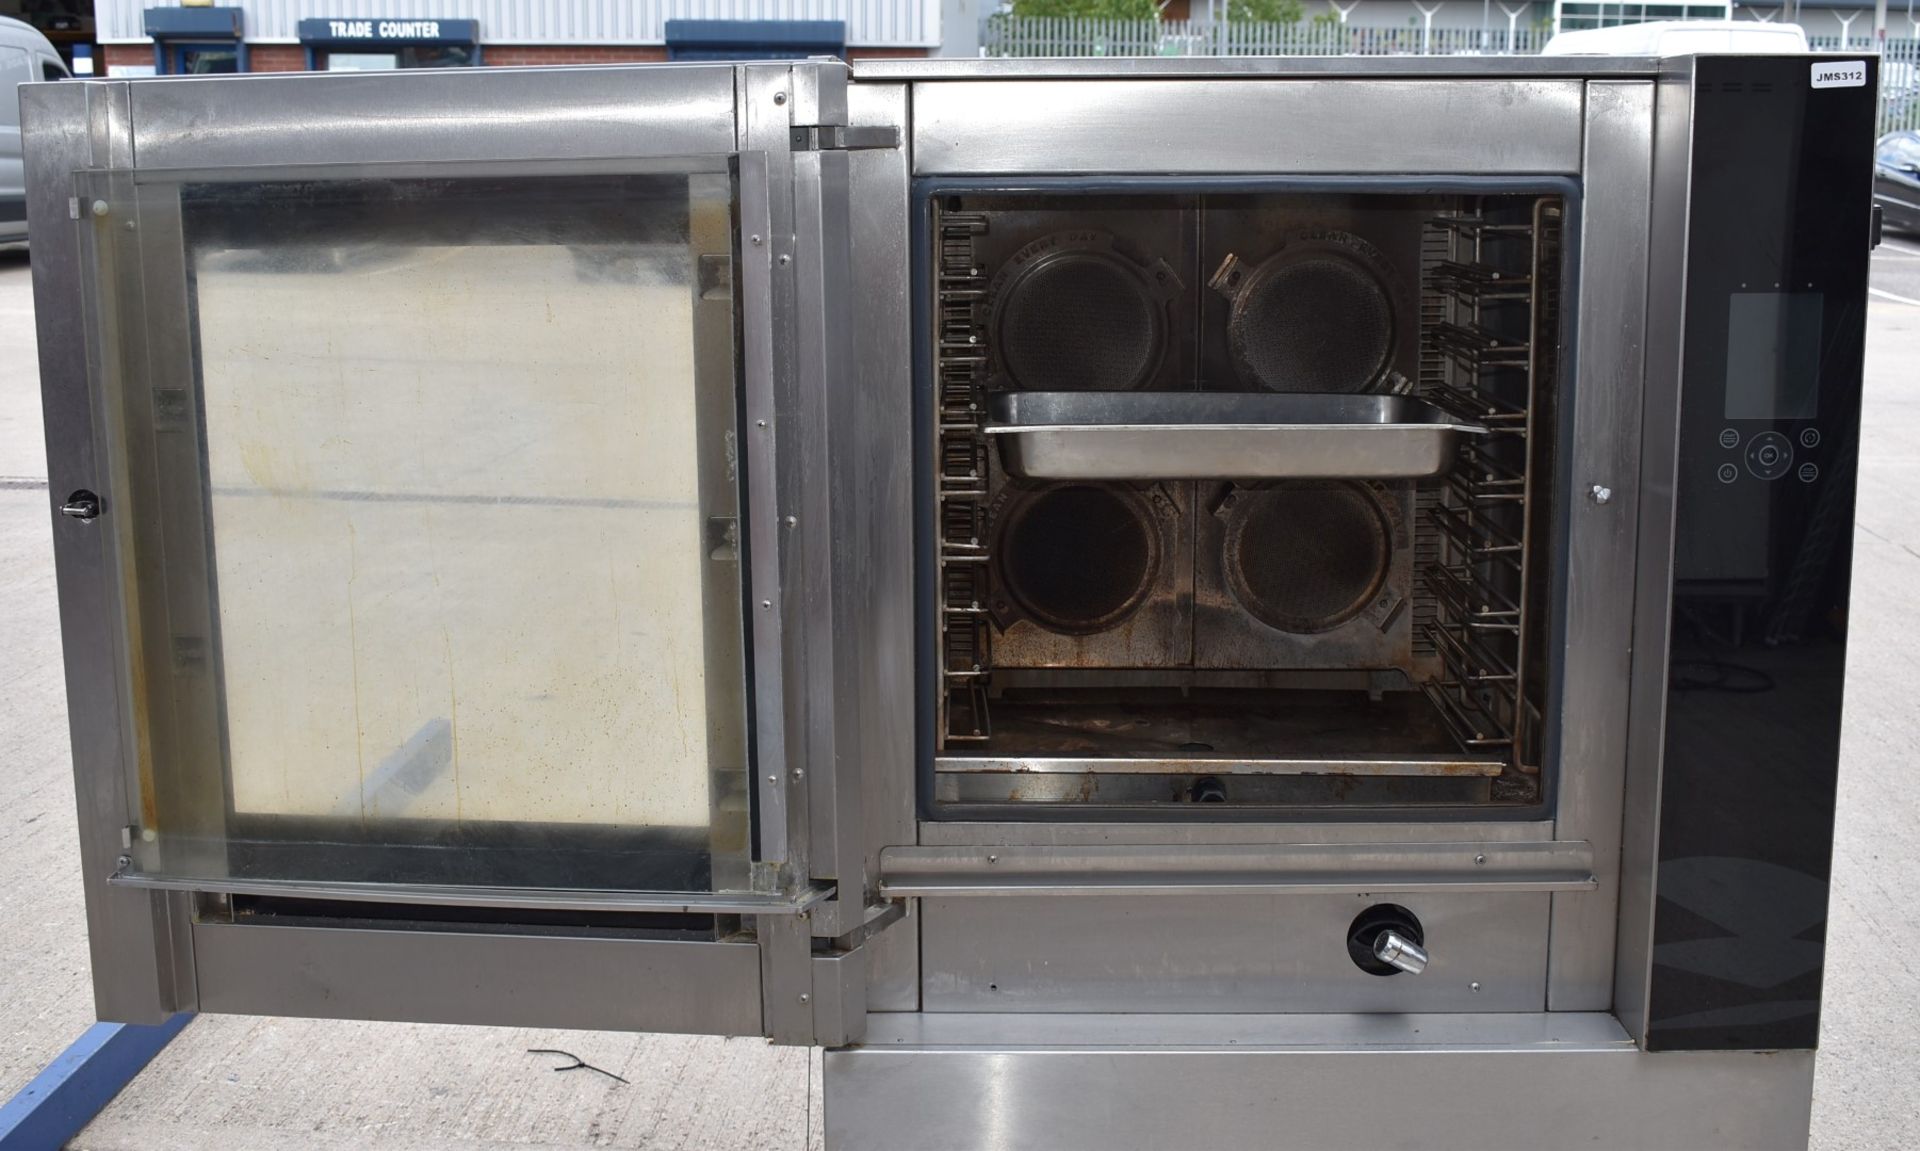 1 x Fri-Jado Turbo Retail 8 Grid Combi Oven - 3 Phase Combi Oven With Various Cooking Programs - Image 9 of 24